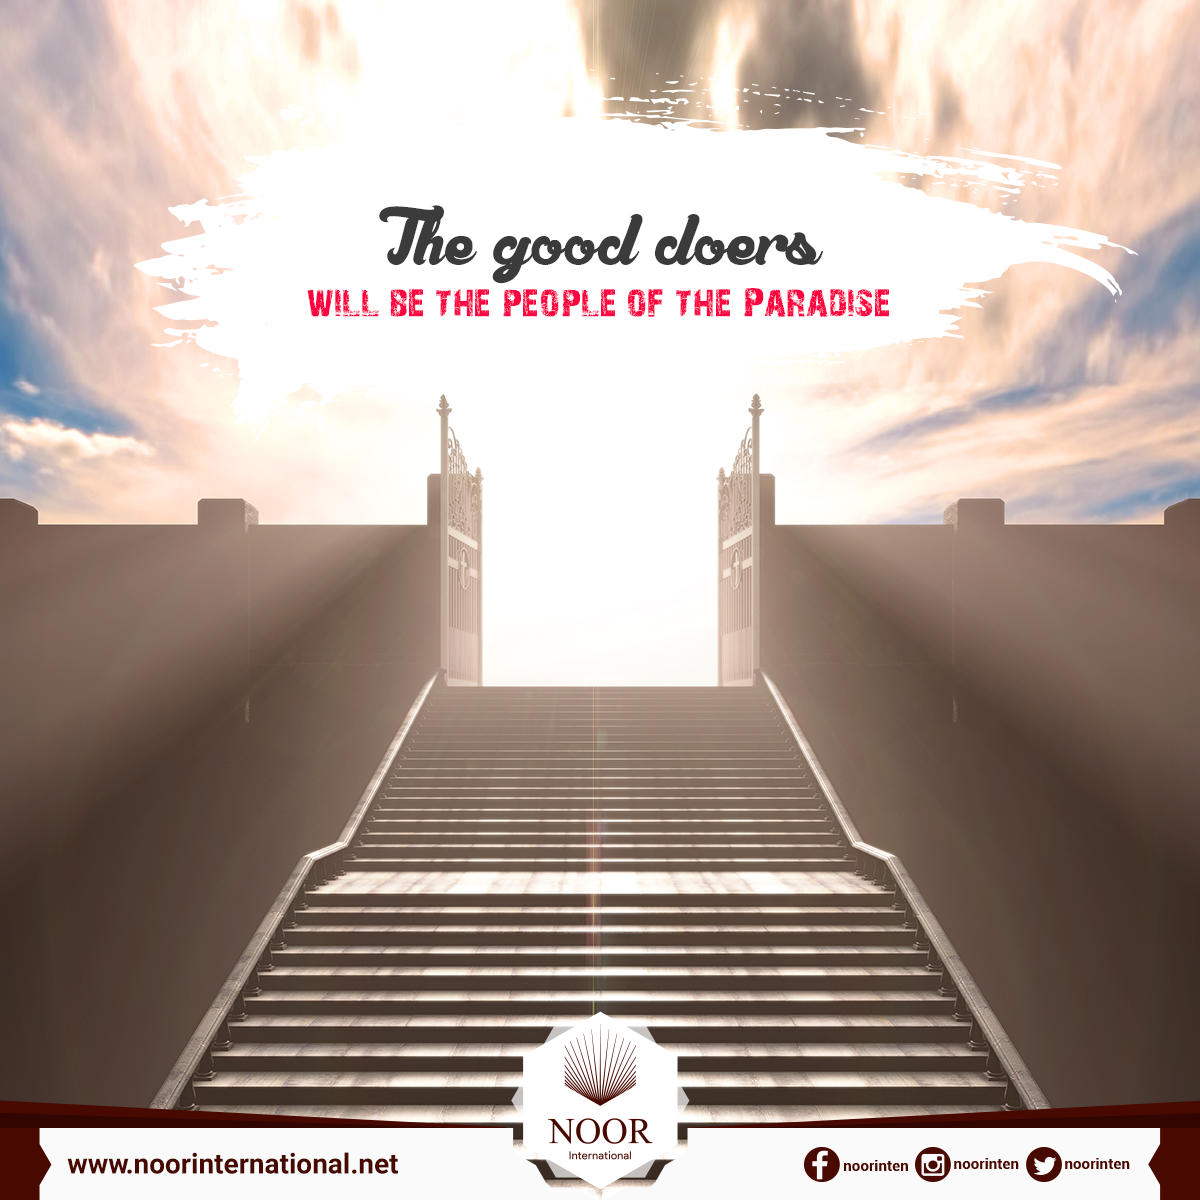 The good doers will be the people of the Paradise